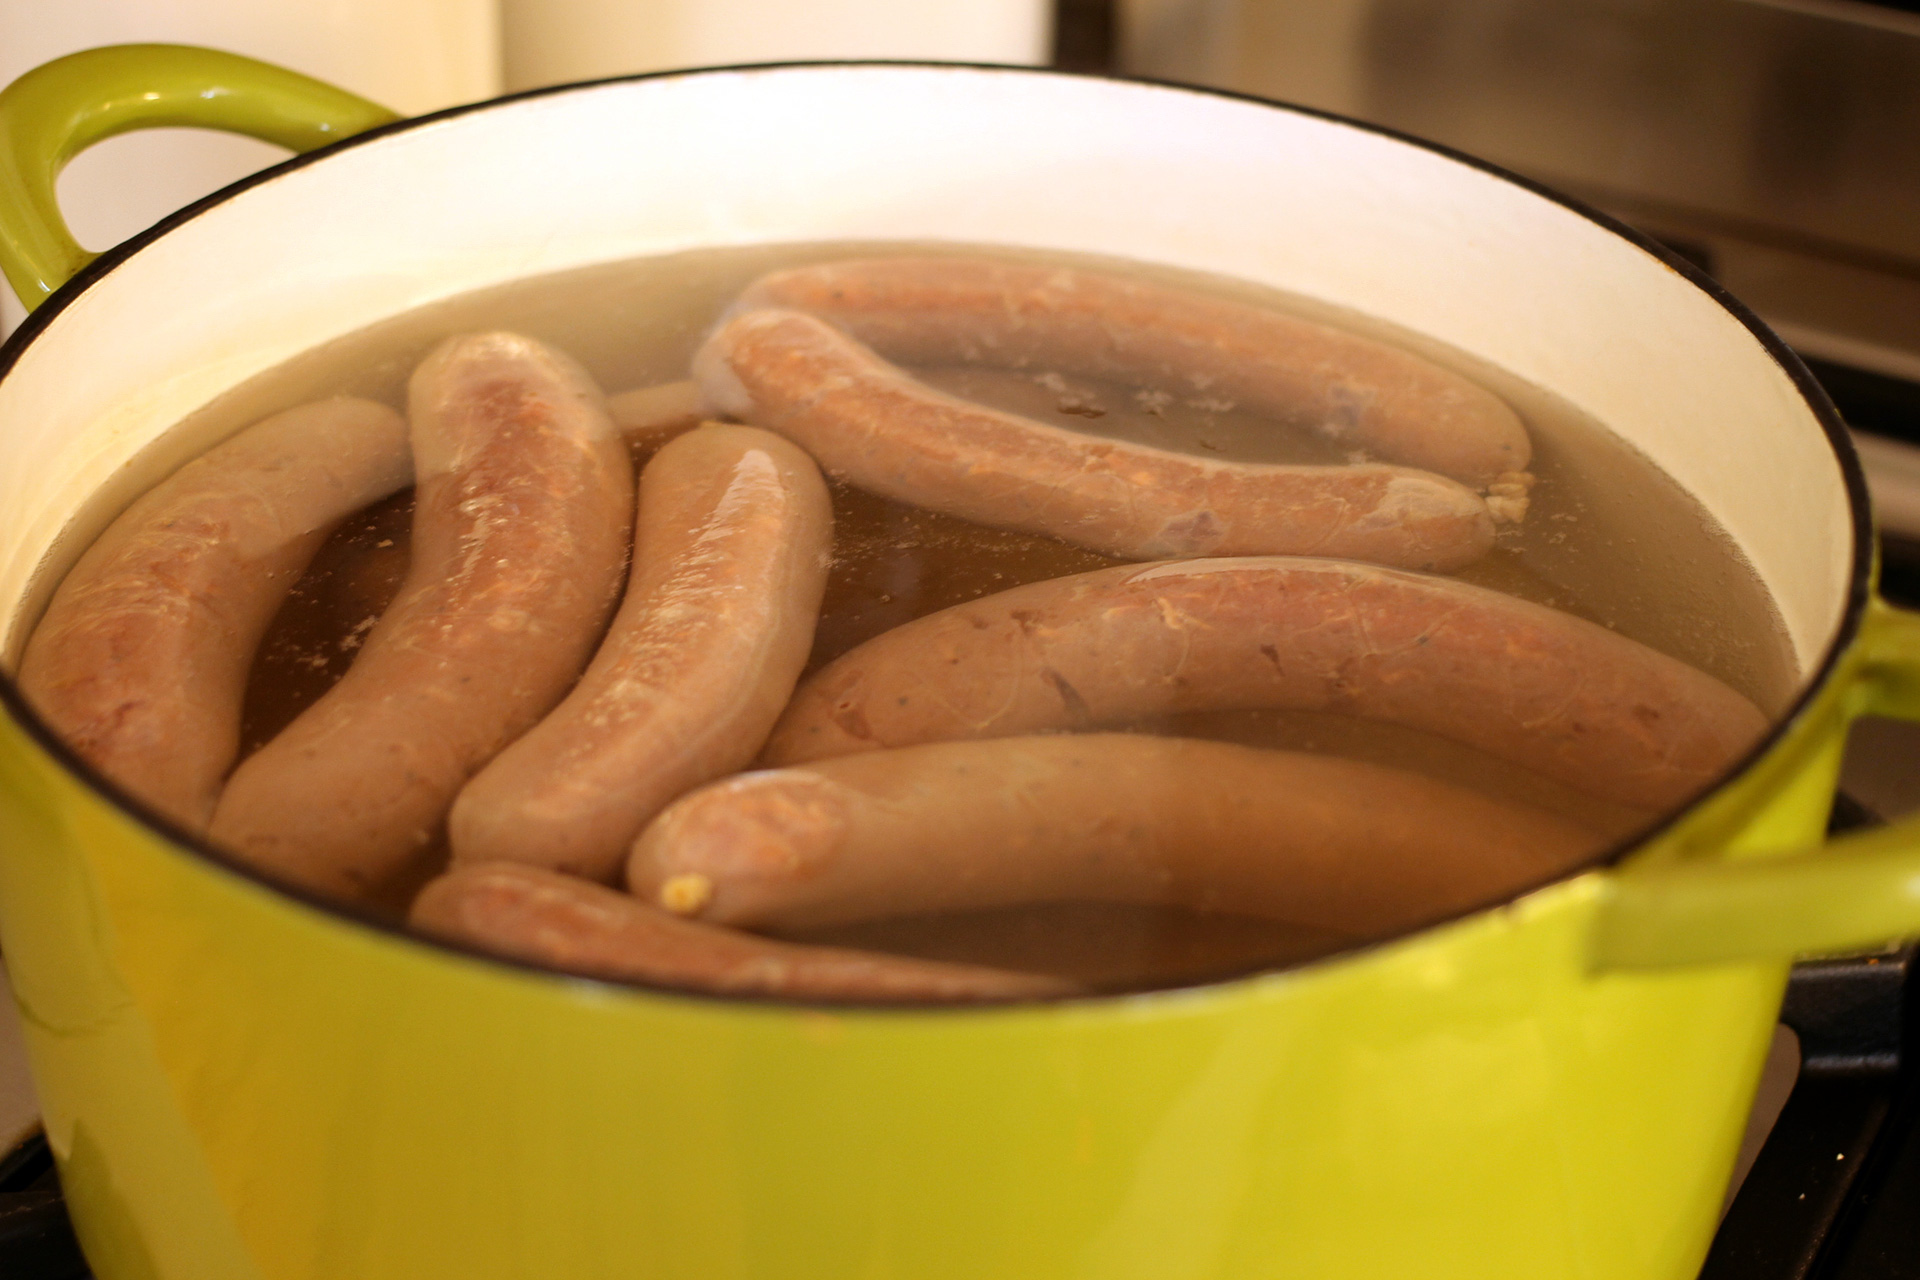 Cooking the sausages gently in water will keep the skins from getting wrinkled when you finish them on the grill or stovetop.